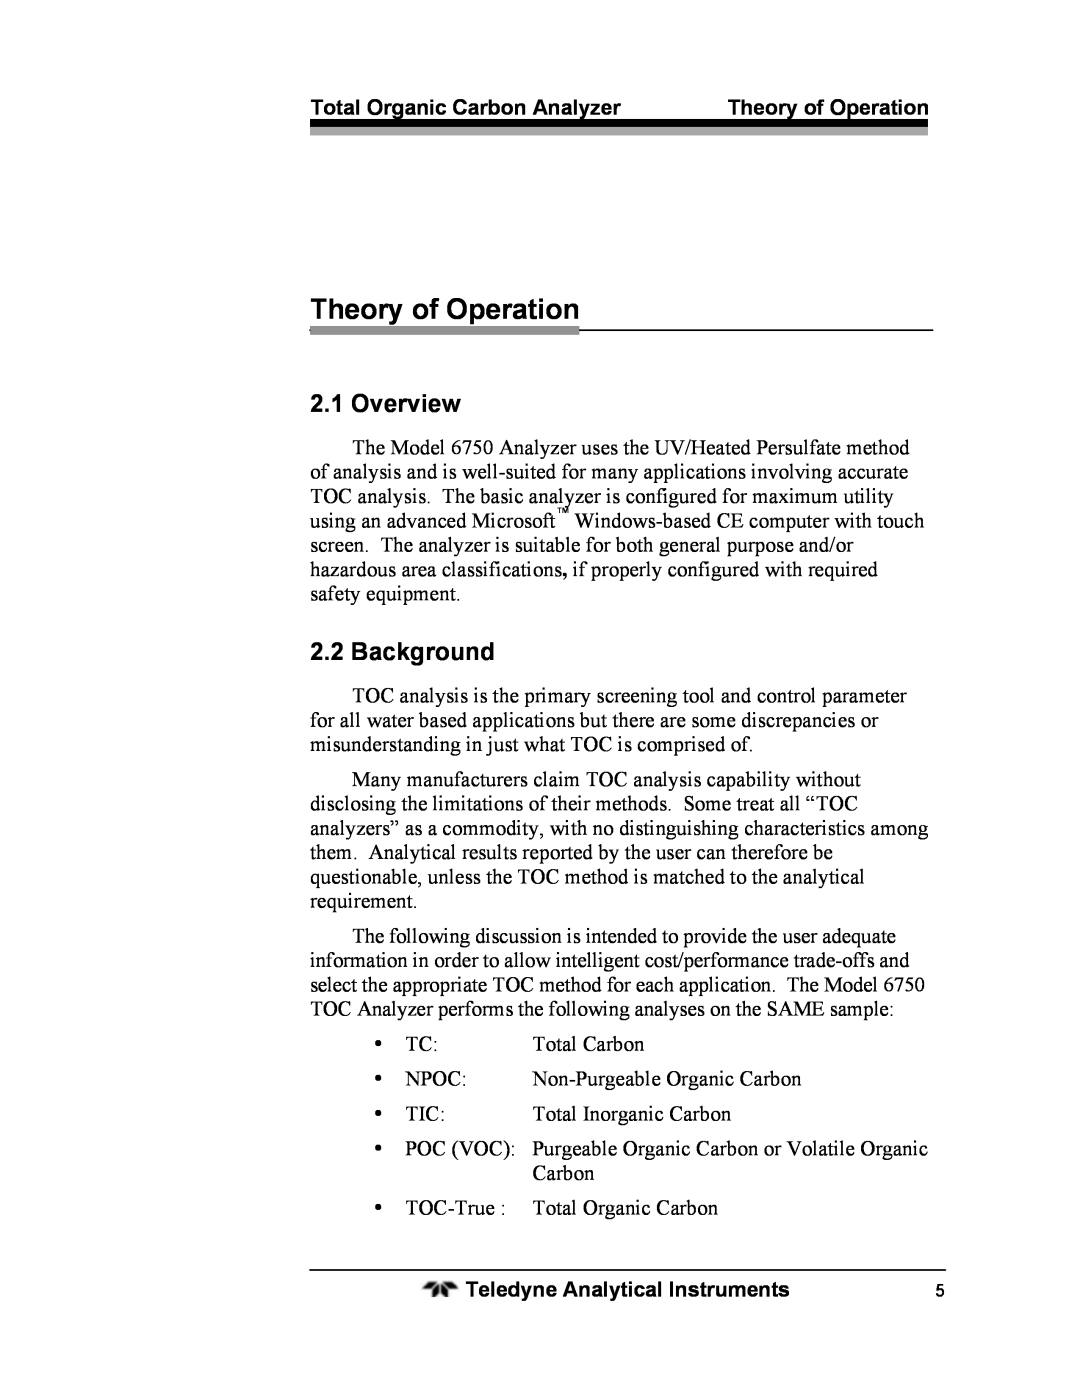 Teledyne 6750 operating instructions Theory of Operation, Overview, Background 